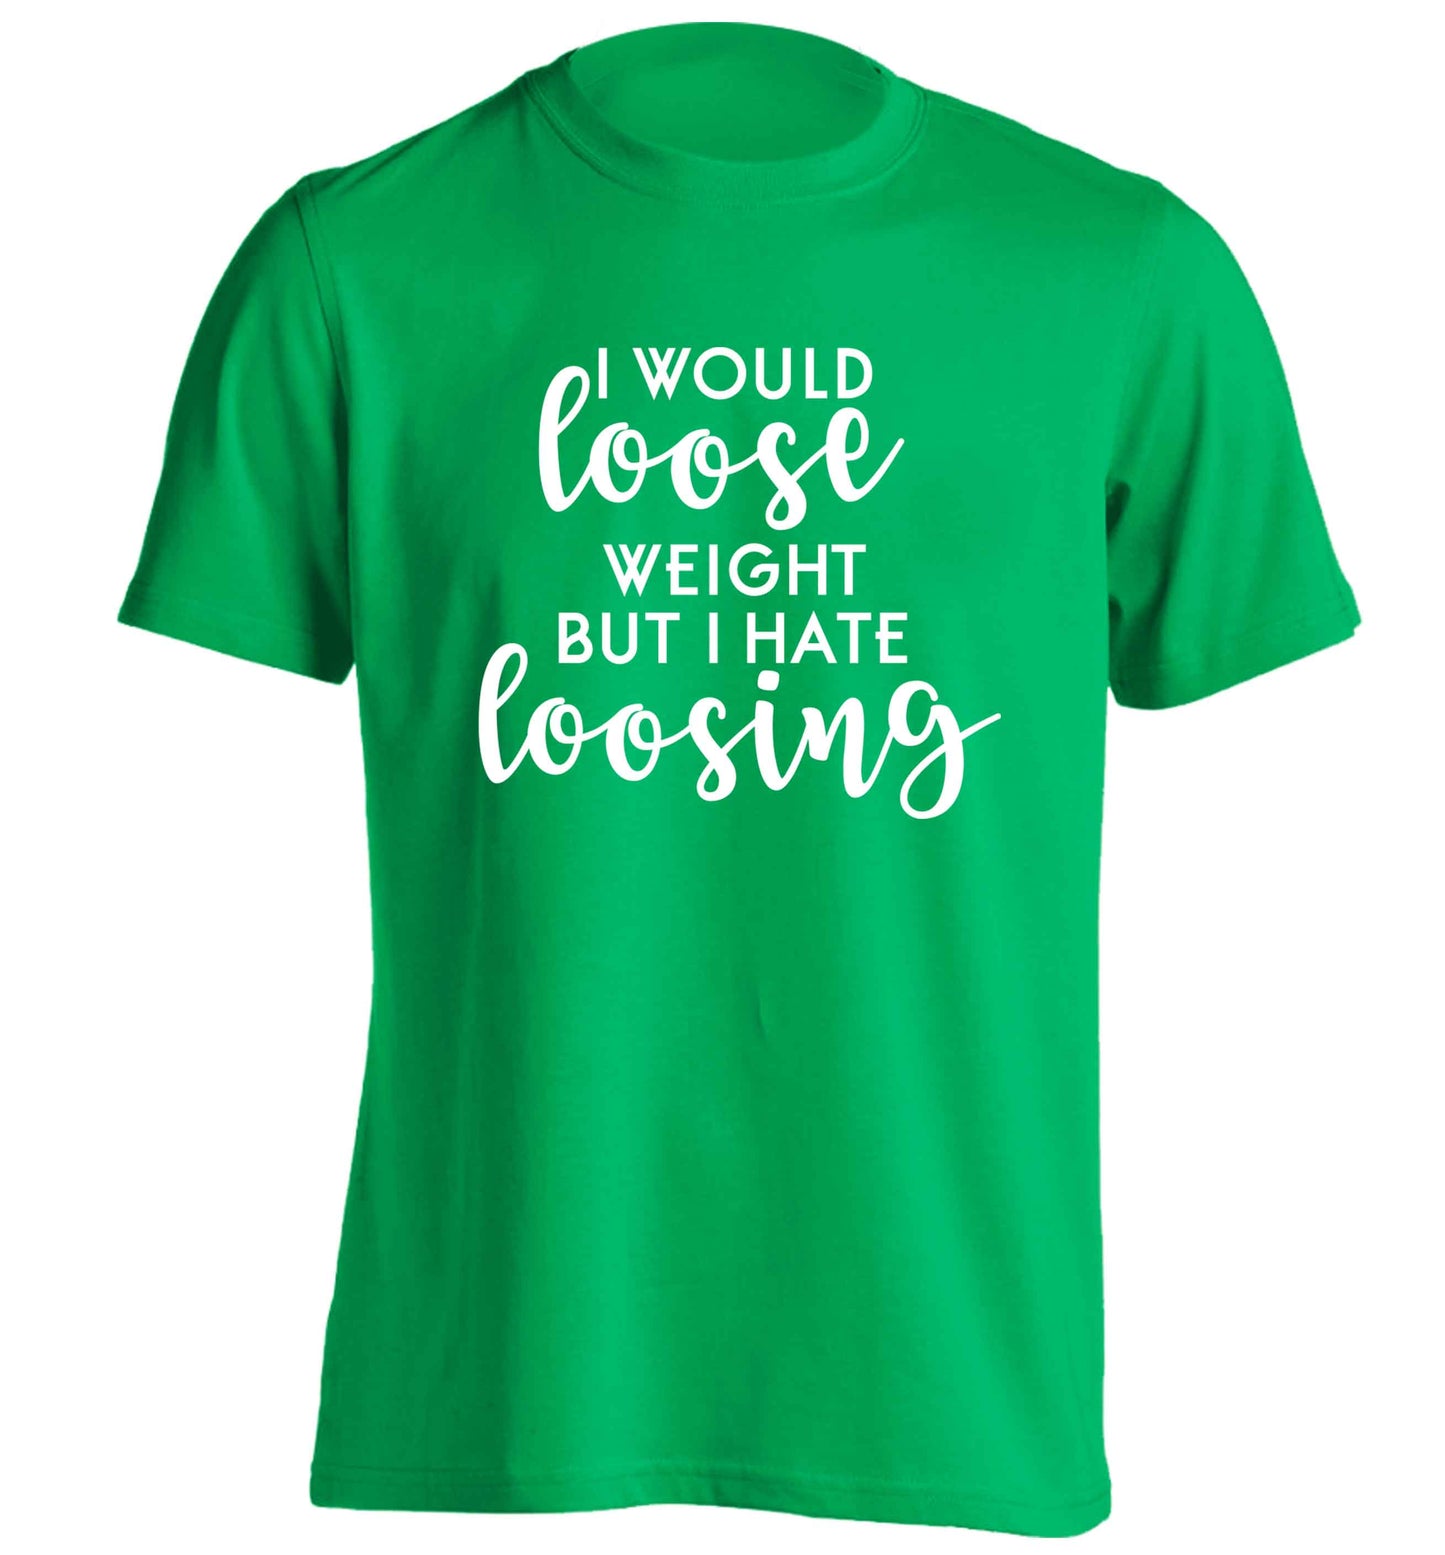 I would loose weight but I hate loosing adults unisex green Tshirt 2XL